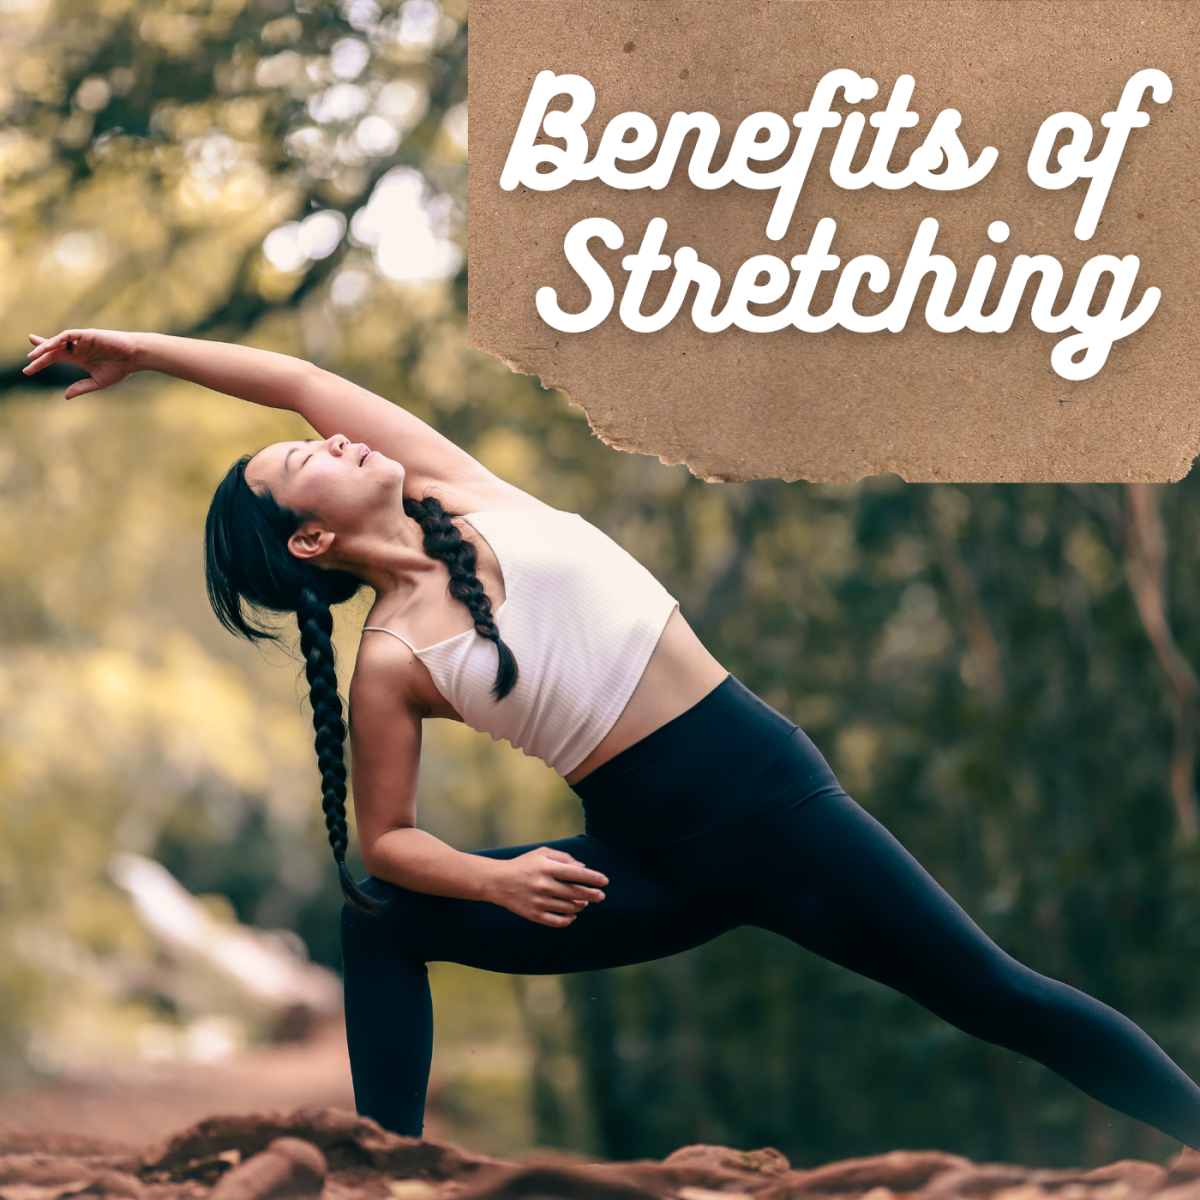 Benefits of stretching